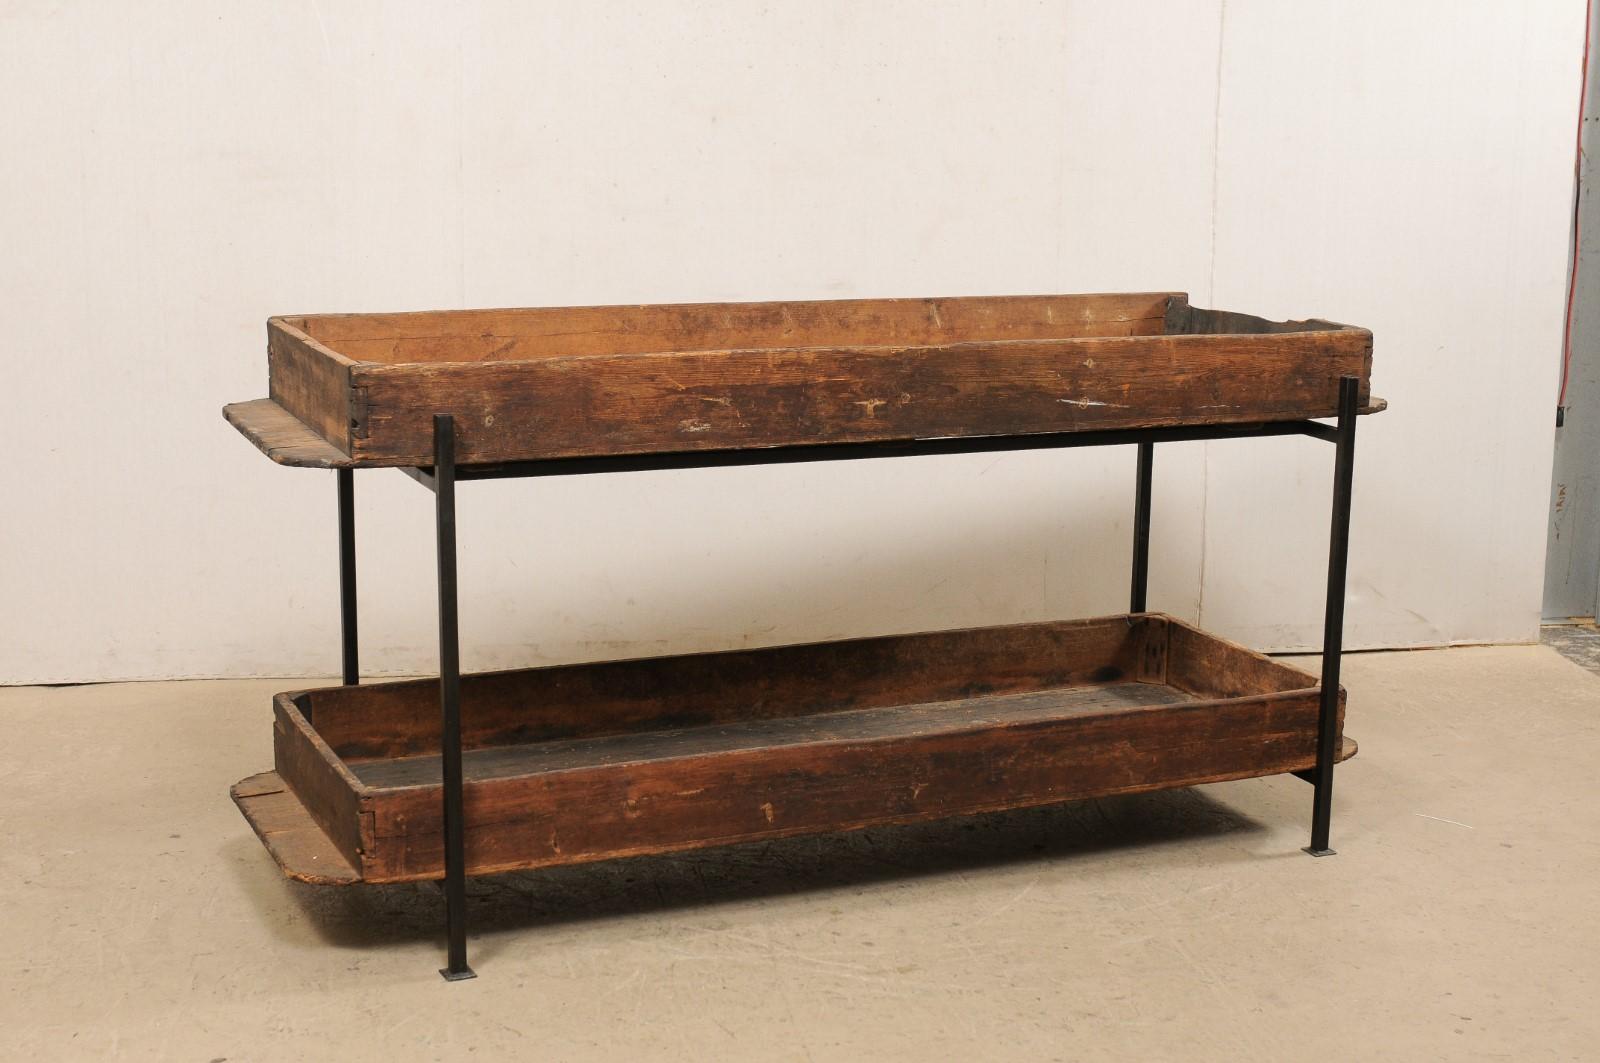 A custom created two-tiered table from antique French baker's bread risings shelves. This long table, just under 7 feet in length, features a rectangular-shape, fashioned from two wooden French bakery shelves, used in the rising of bread loaves,